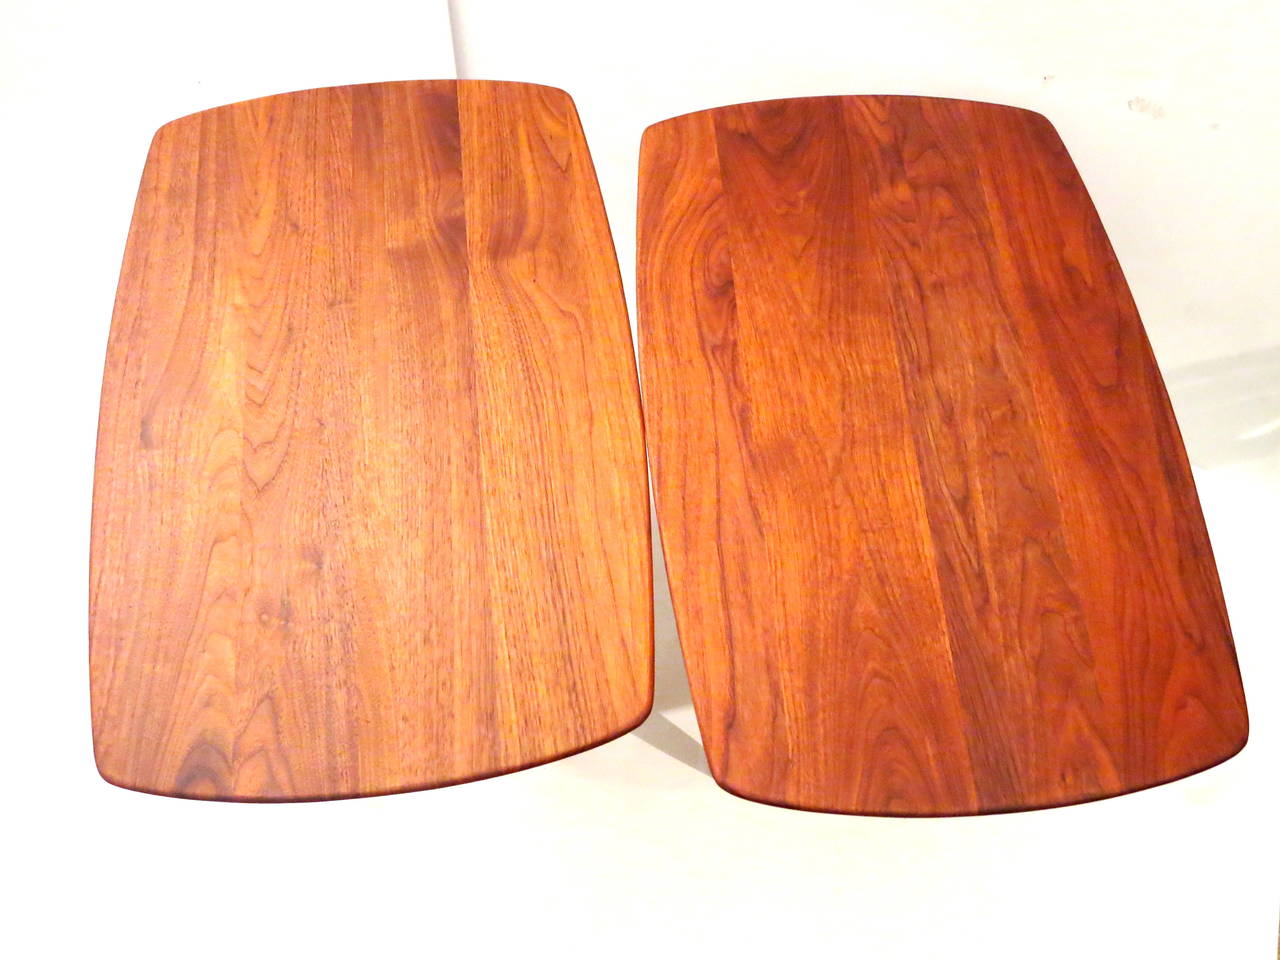 Mid-Century Modern American Modern pair of solid walnut end tables by Ace-Hi of California